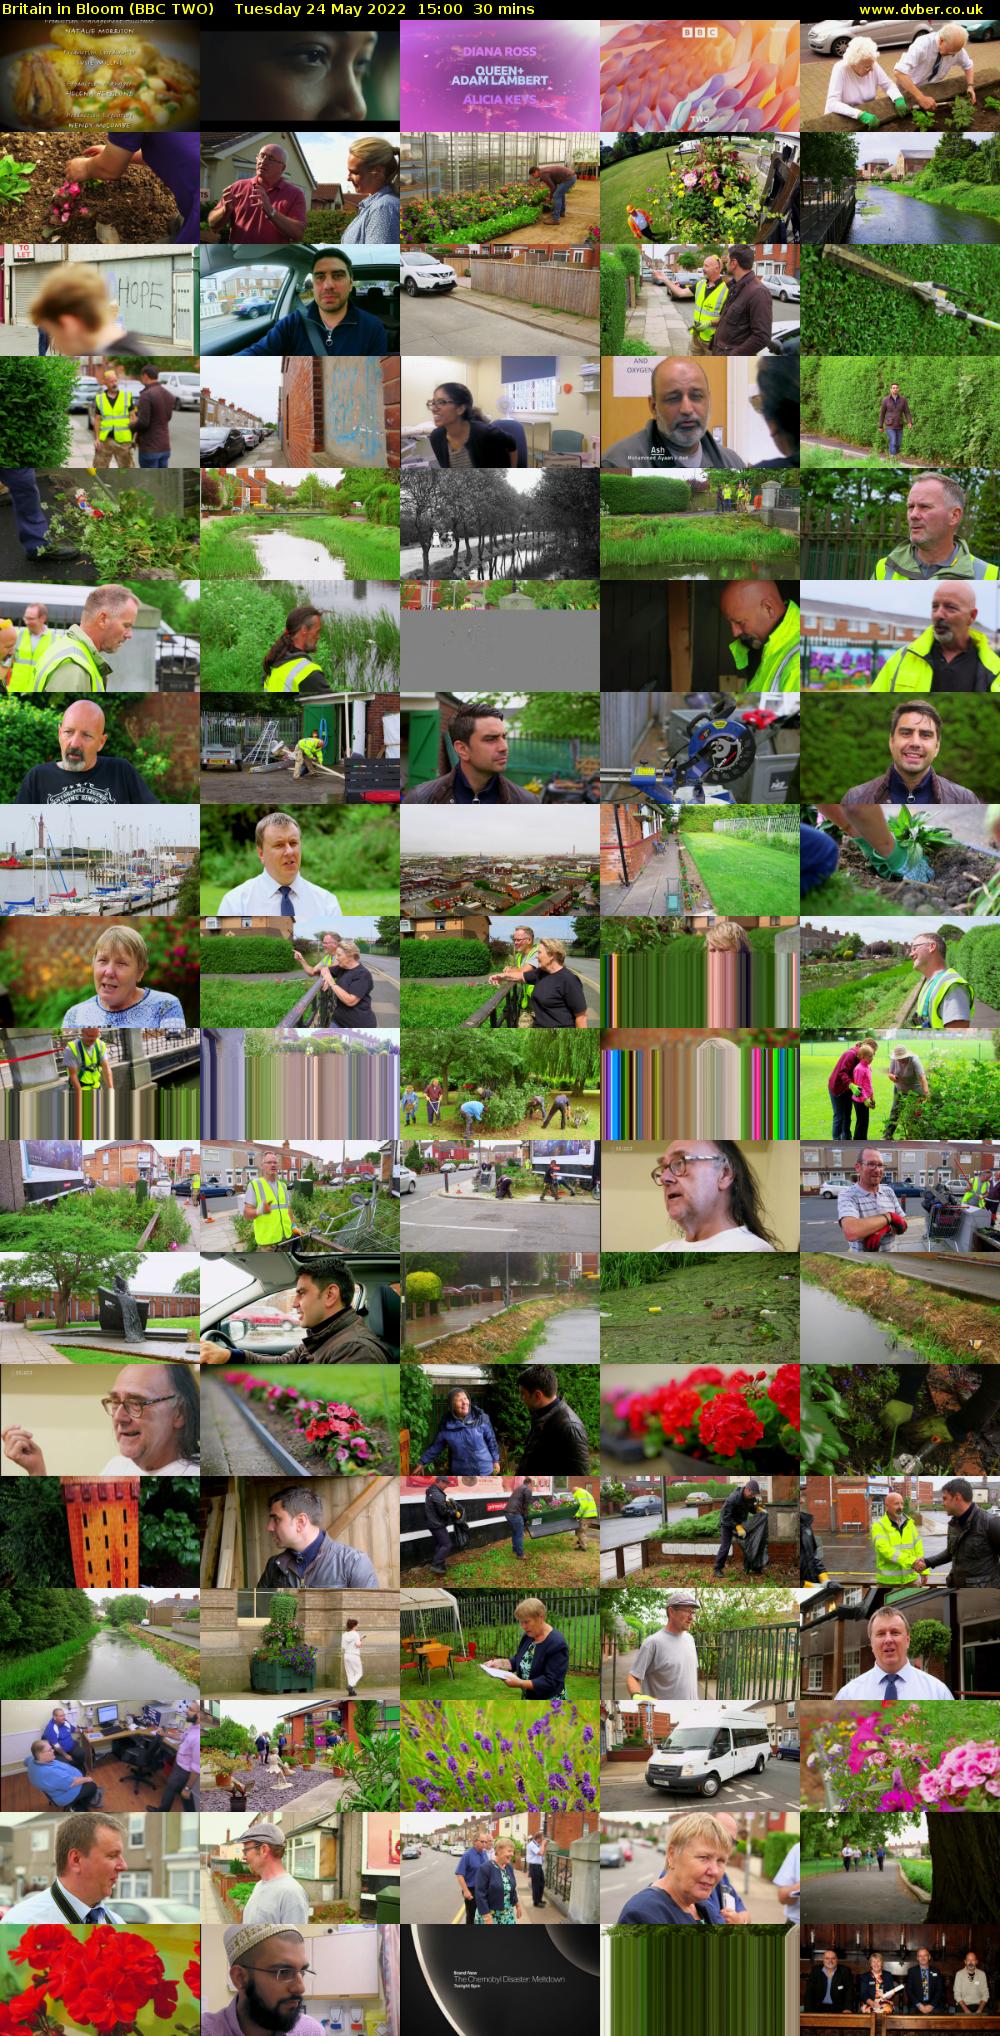 Britain in Bloom (BBC TWO) Tuesday 24 May 2022 15:00 - 15:30